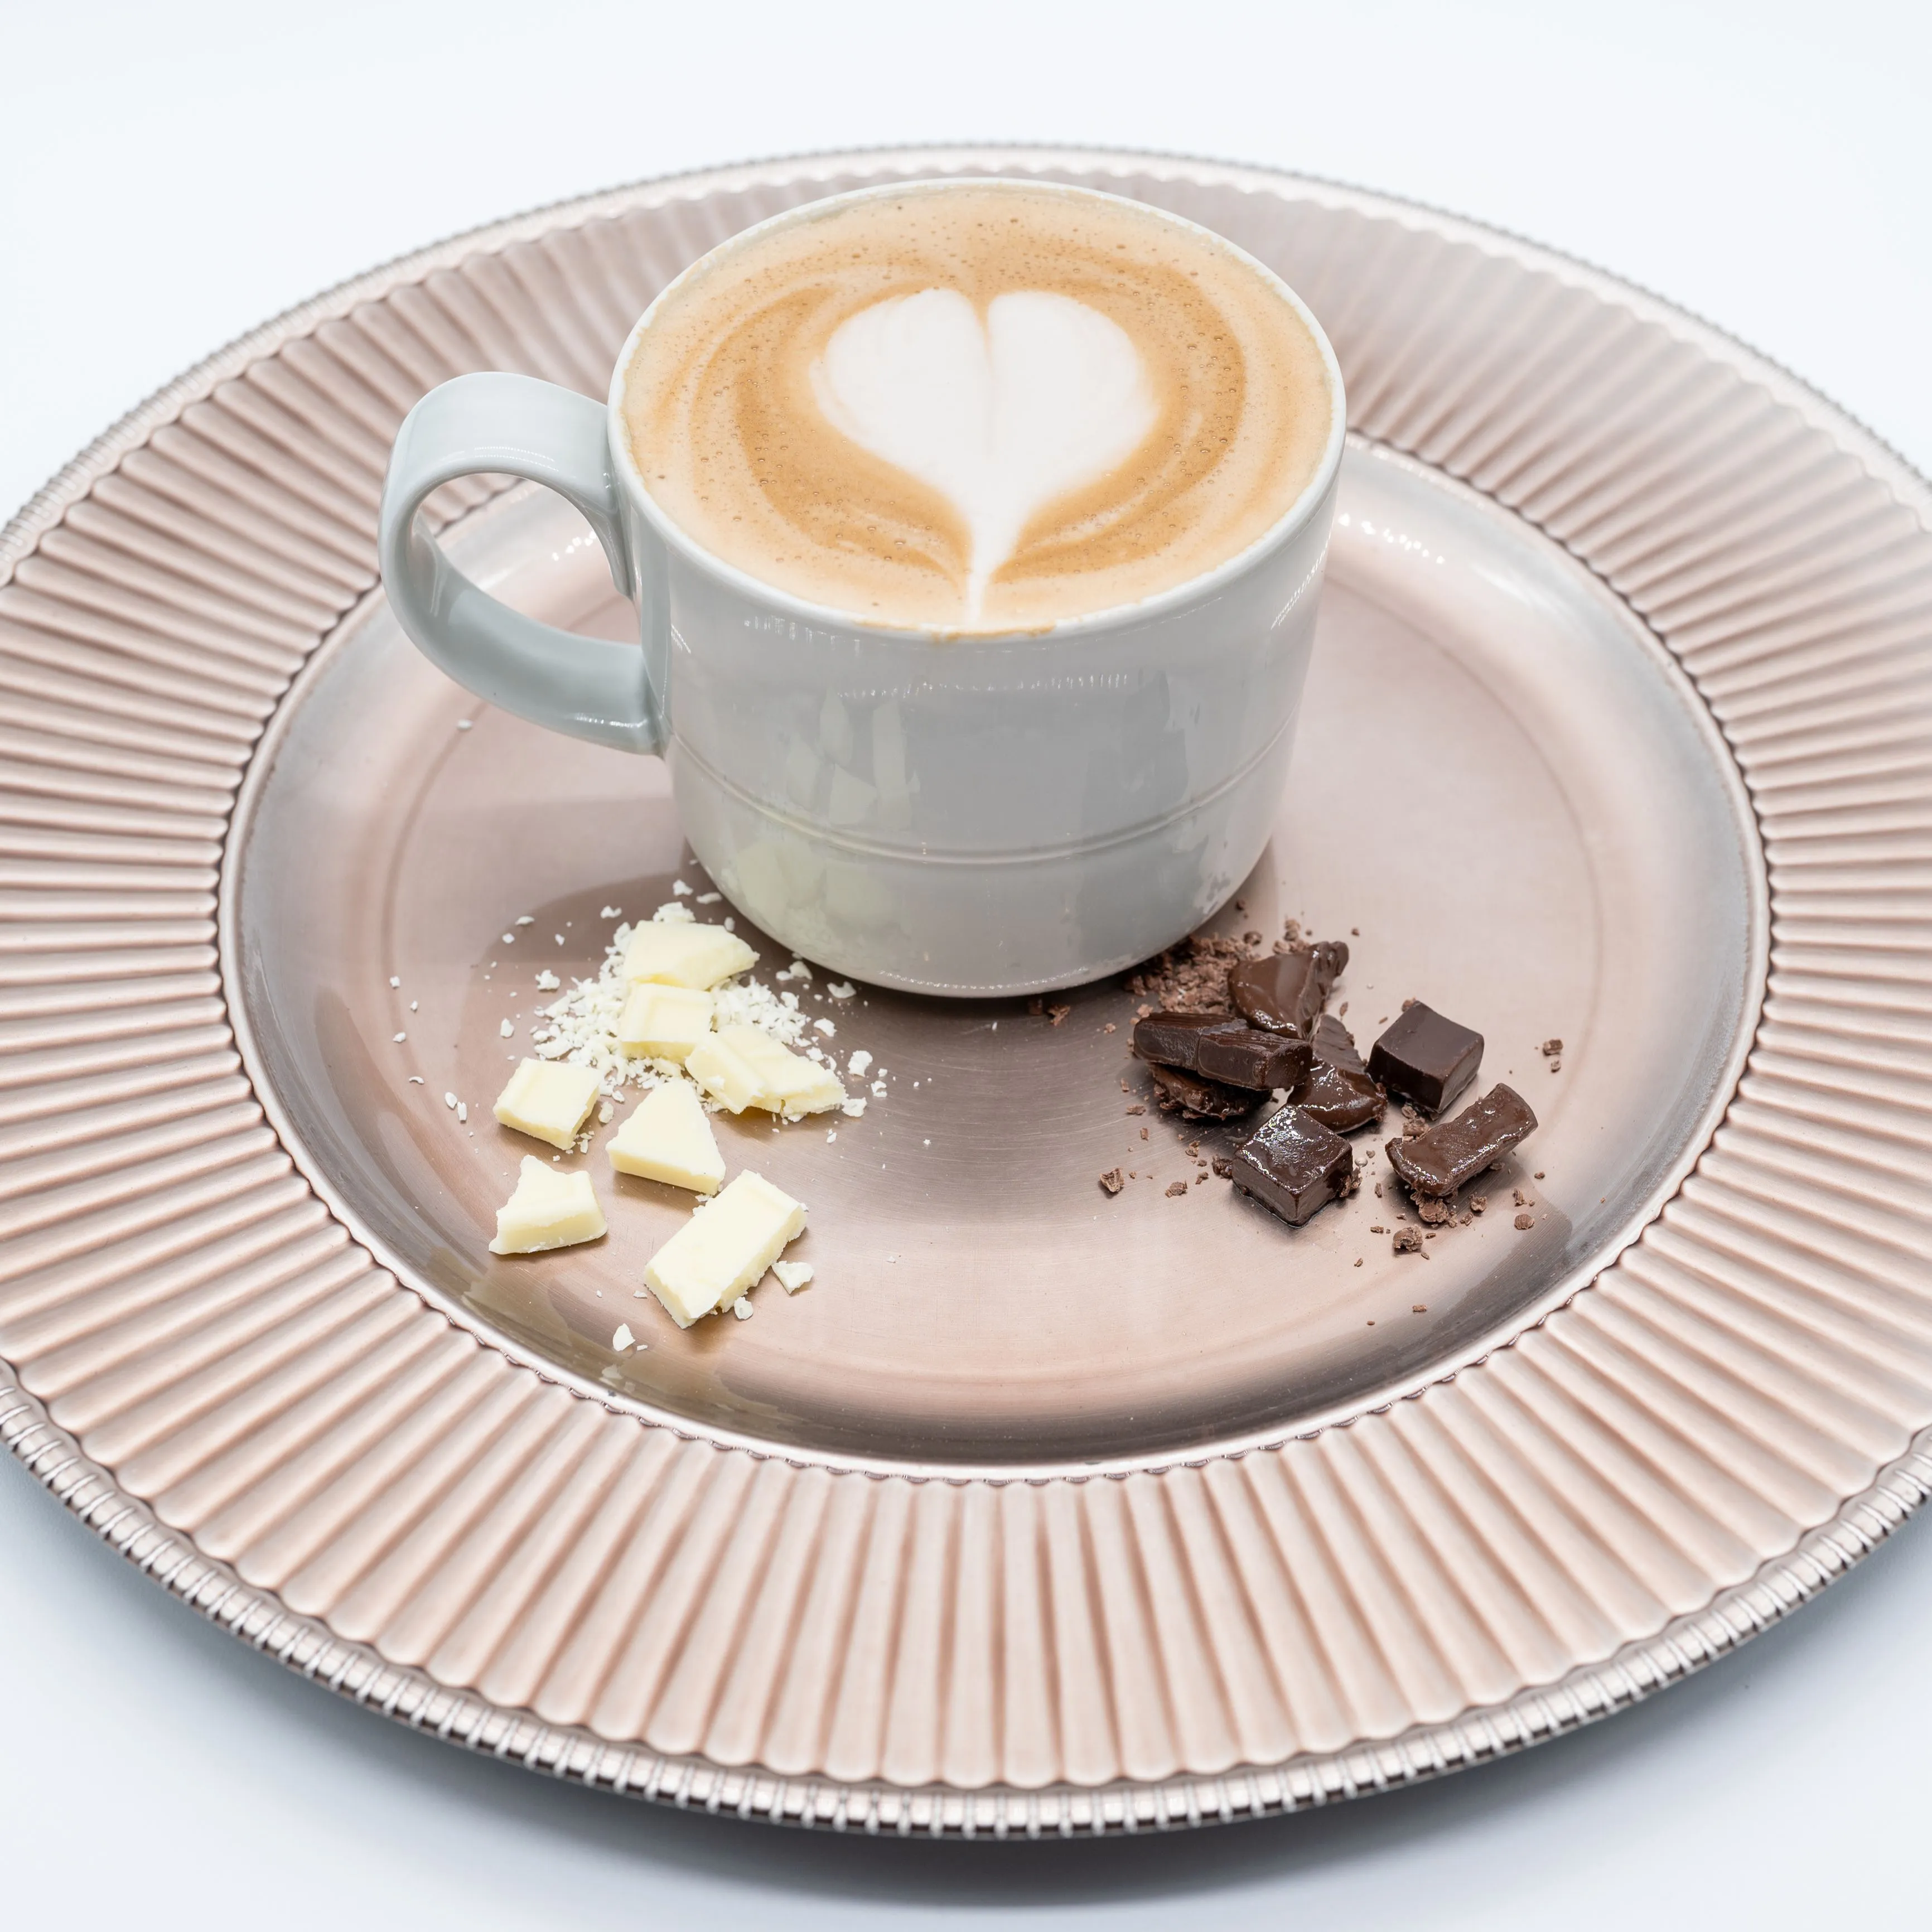 A cup of cappuccino with heart-shaped latte art on a ribbed bronze plate with pieces of white and dark chocolate.